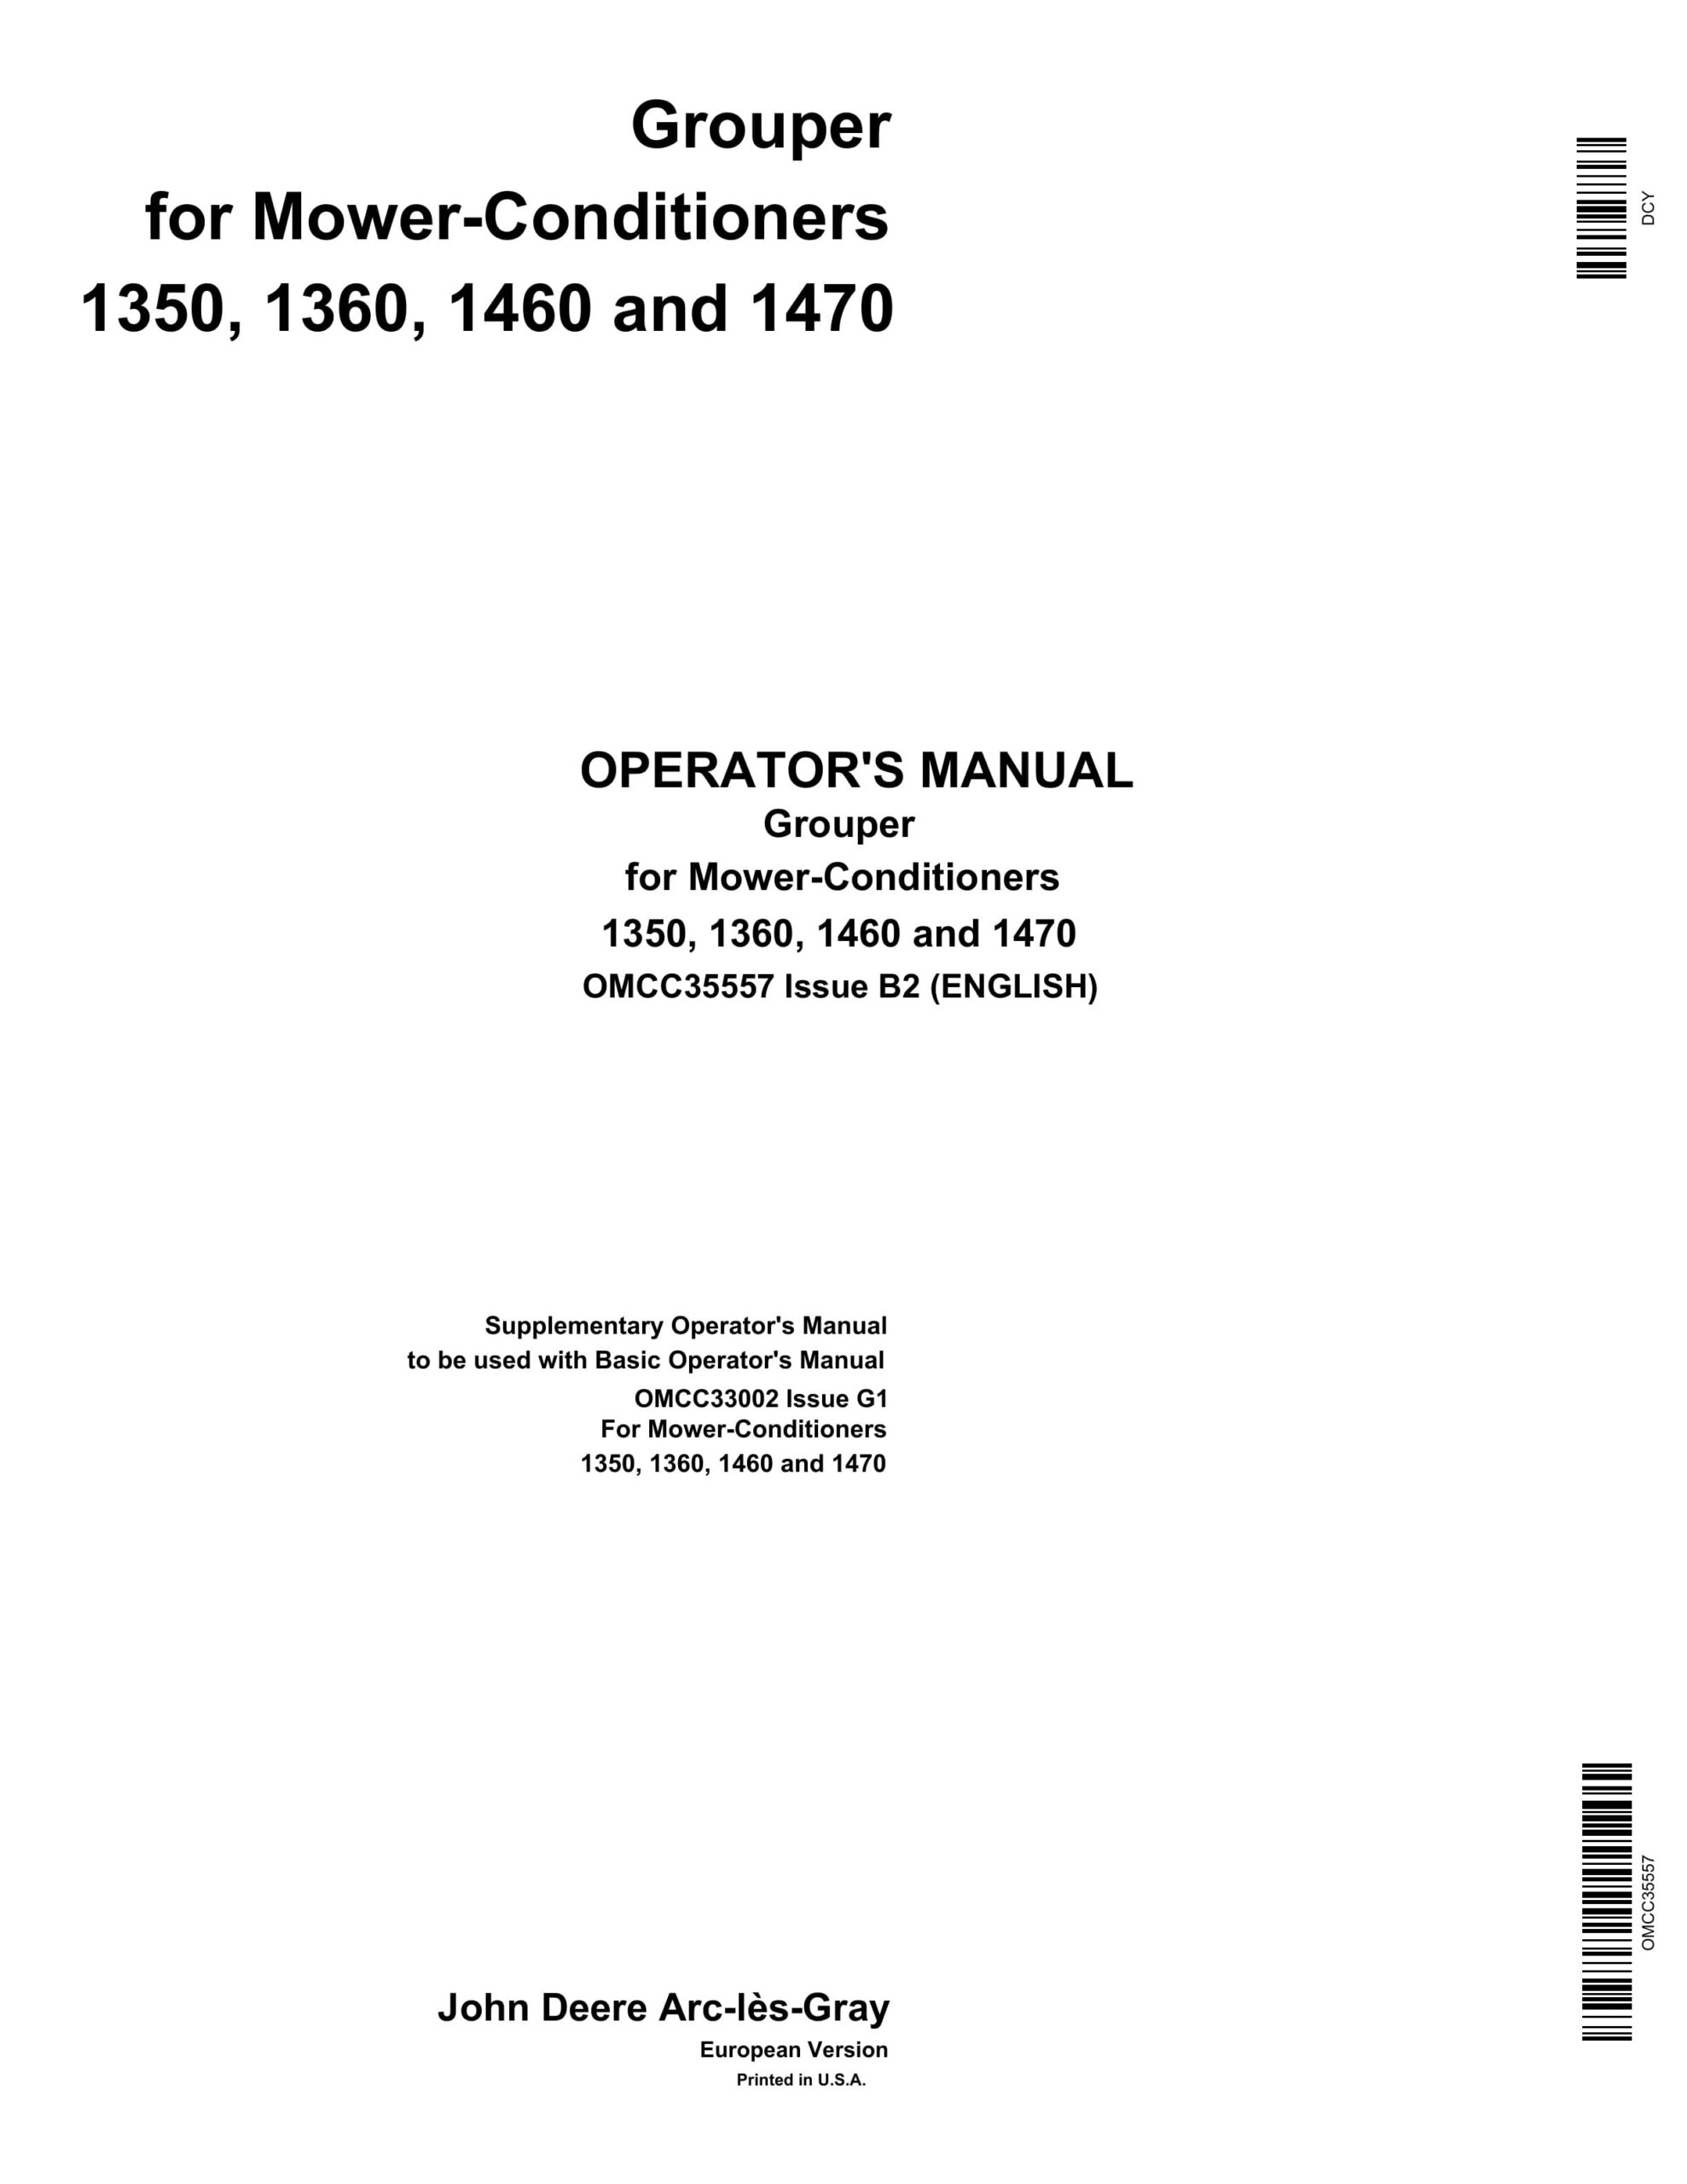 John Deere 1350, 1360, 1460 AND 1470 Grouper for Mower-Conditioner Operator Manual OMCC35557-1